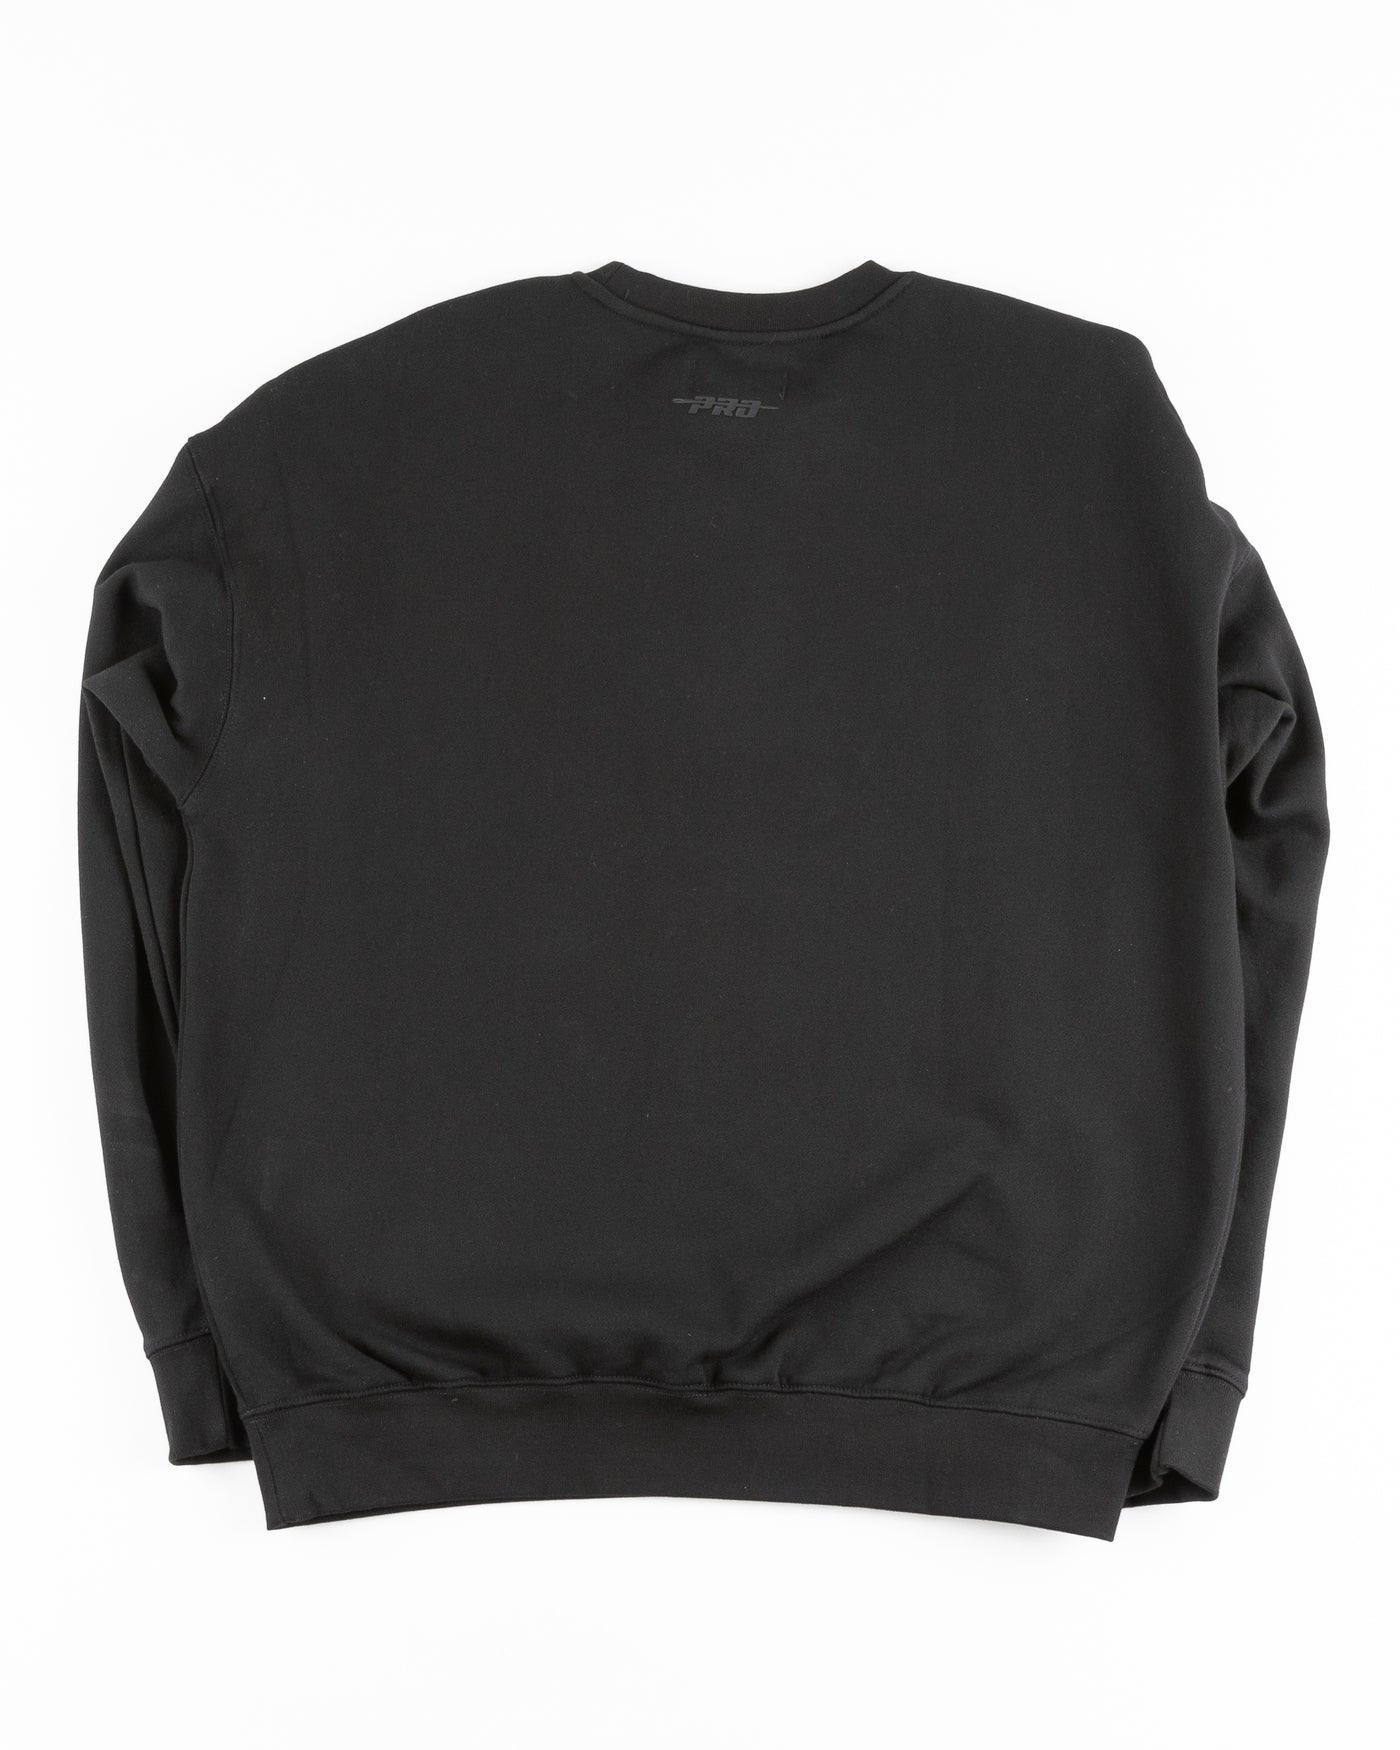 all black crewneck with tonal Chicago Blackhawks patches embroidered on front and shoulders - back lay flat